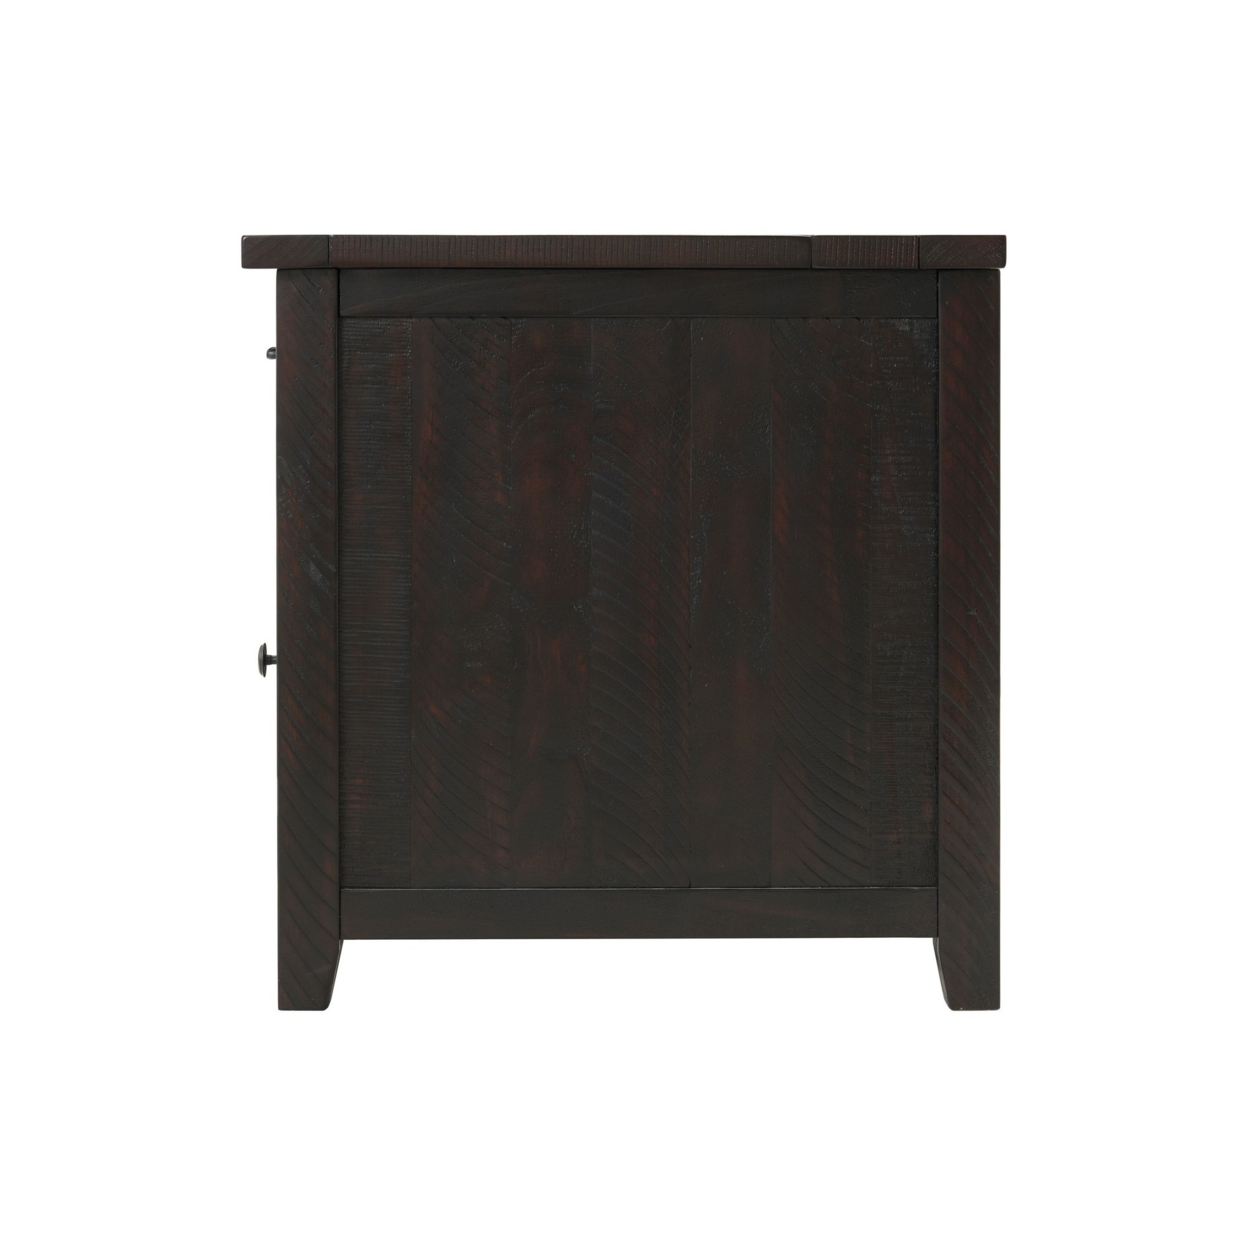 Chairside Table With 1 Drawer And 1 Wire Door, Espresso Brown- Saltoro Sherpi